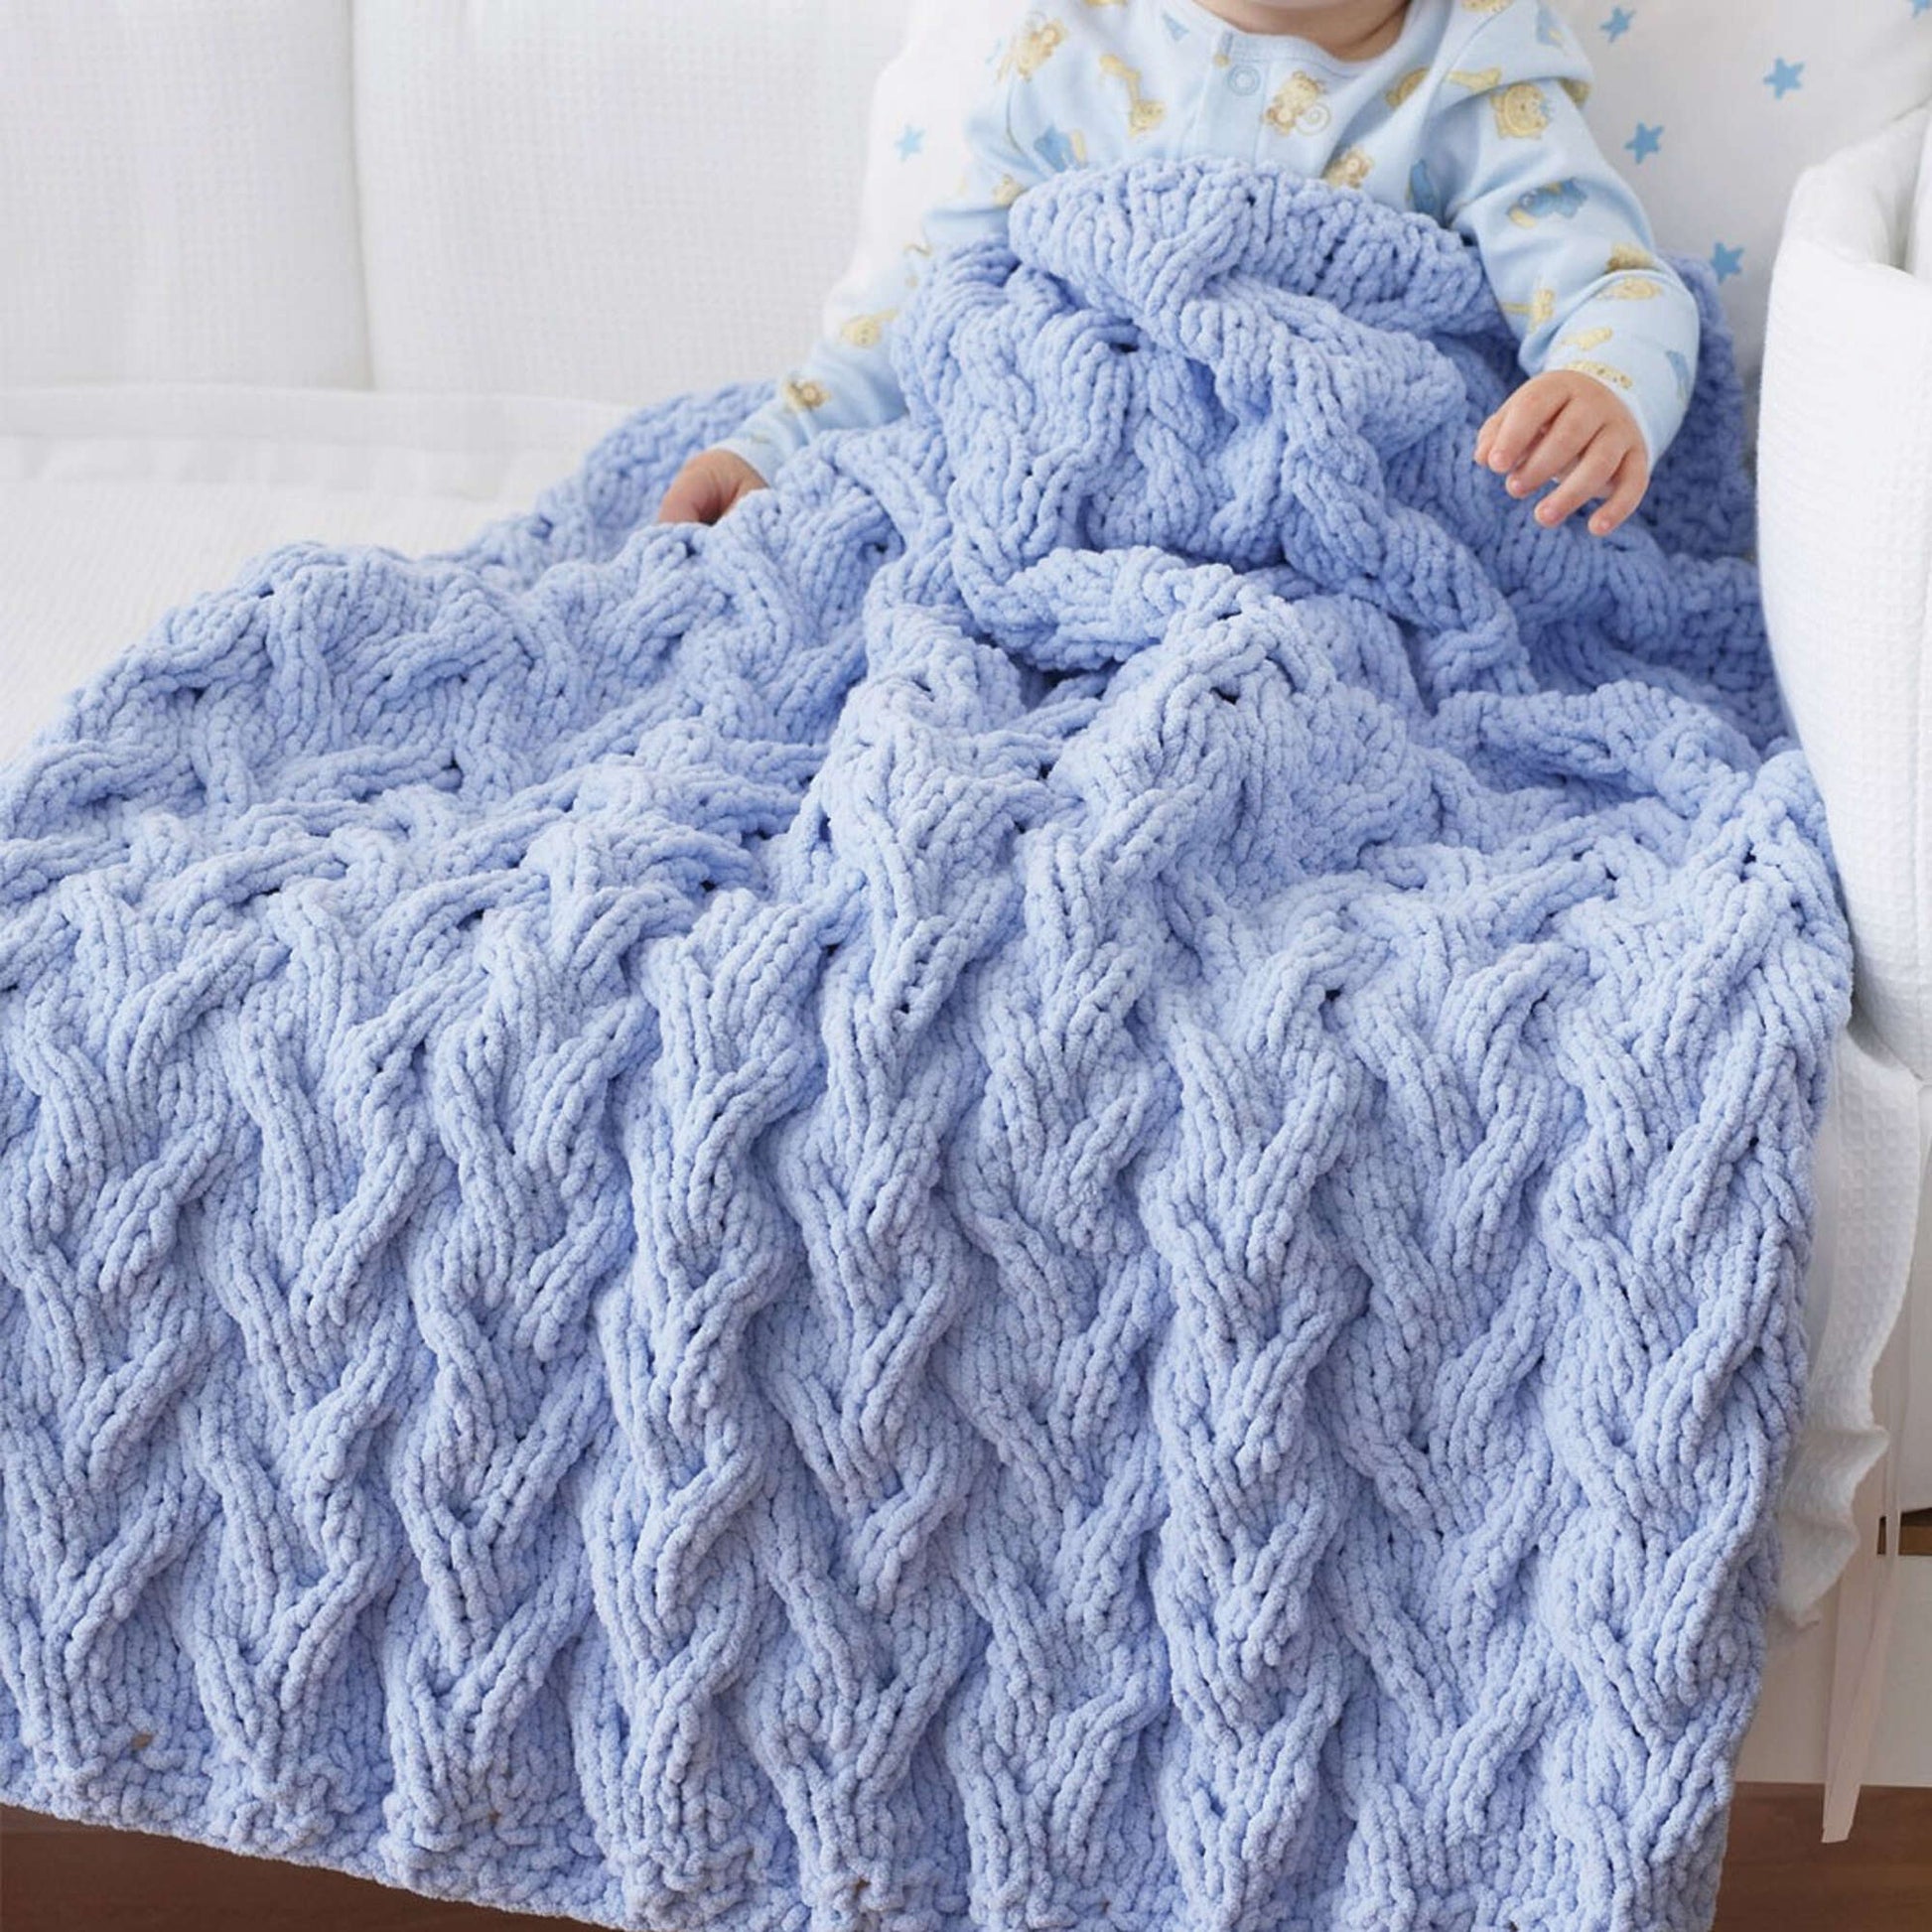 Bernat Shadow Cable Knit Baby Blanket Knit Blanket made in Bernat Baby Blanket yarn